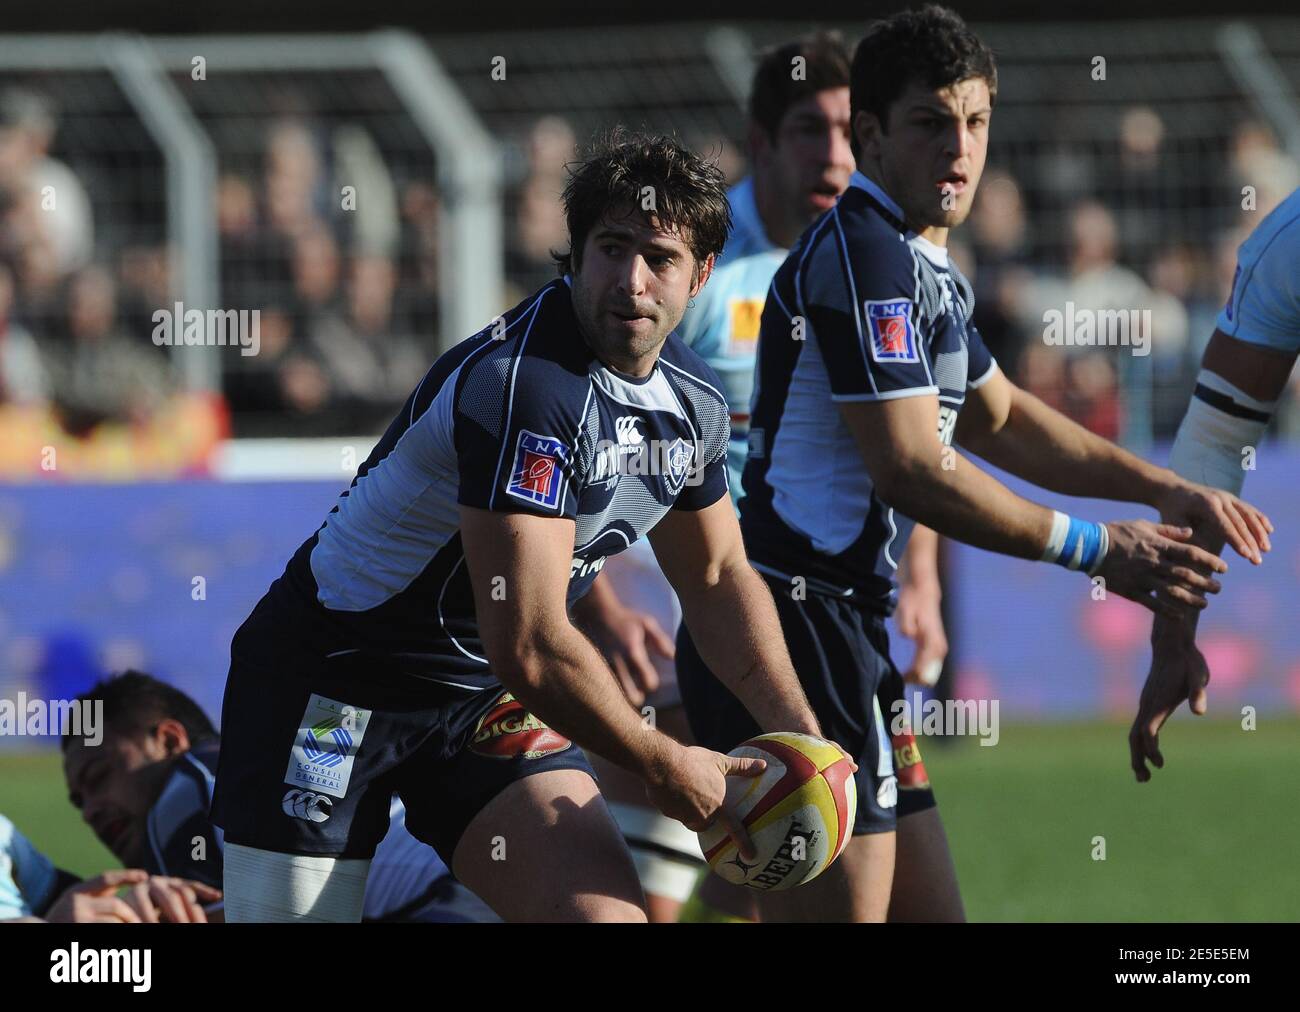 Castres' Sebastien Tillous Borde during the French championship Top 14 rugby  match USAP vs Castres at the Aime Giral stadium in Perpignan, France on  December 20, 2008. USAP won 16-9. Photo by